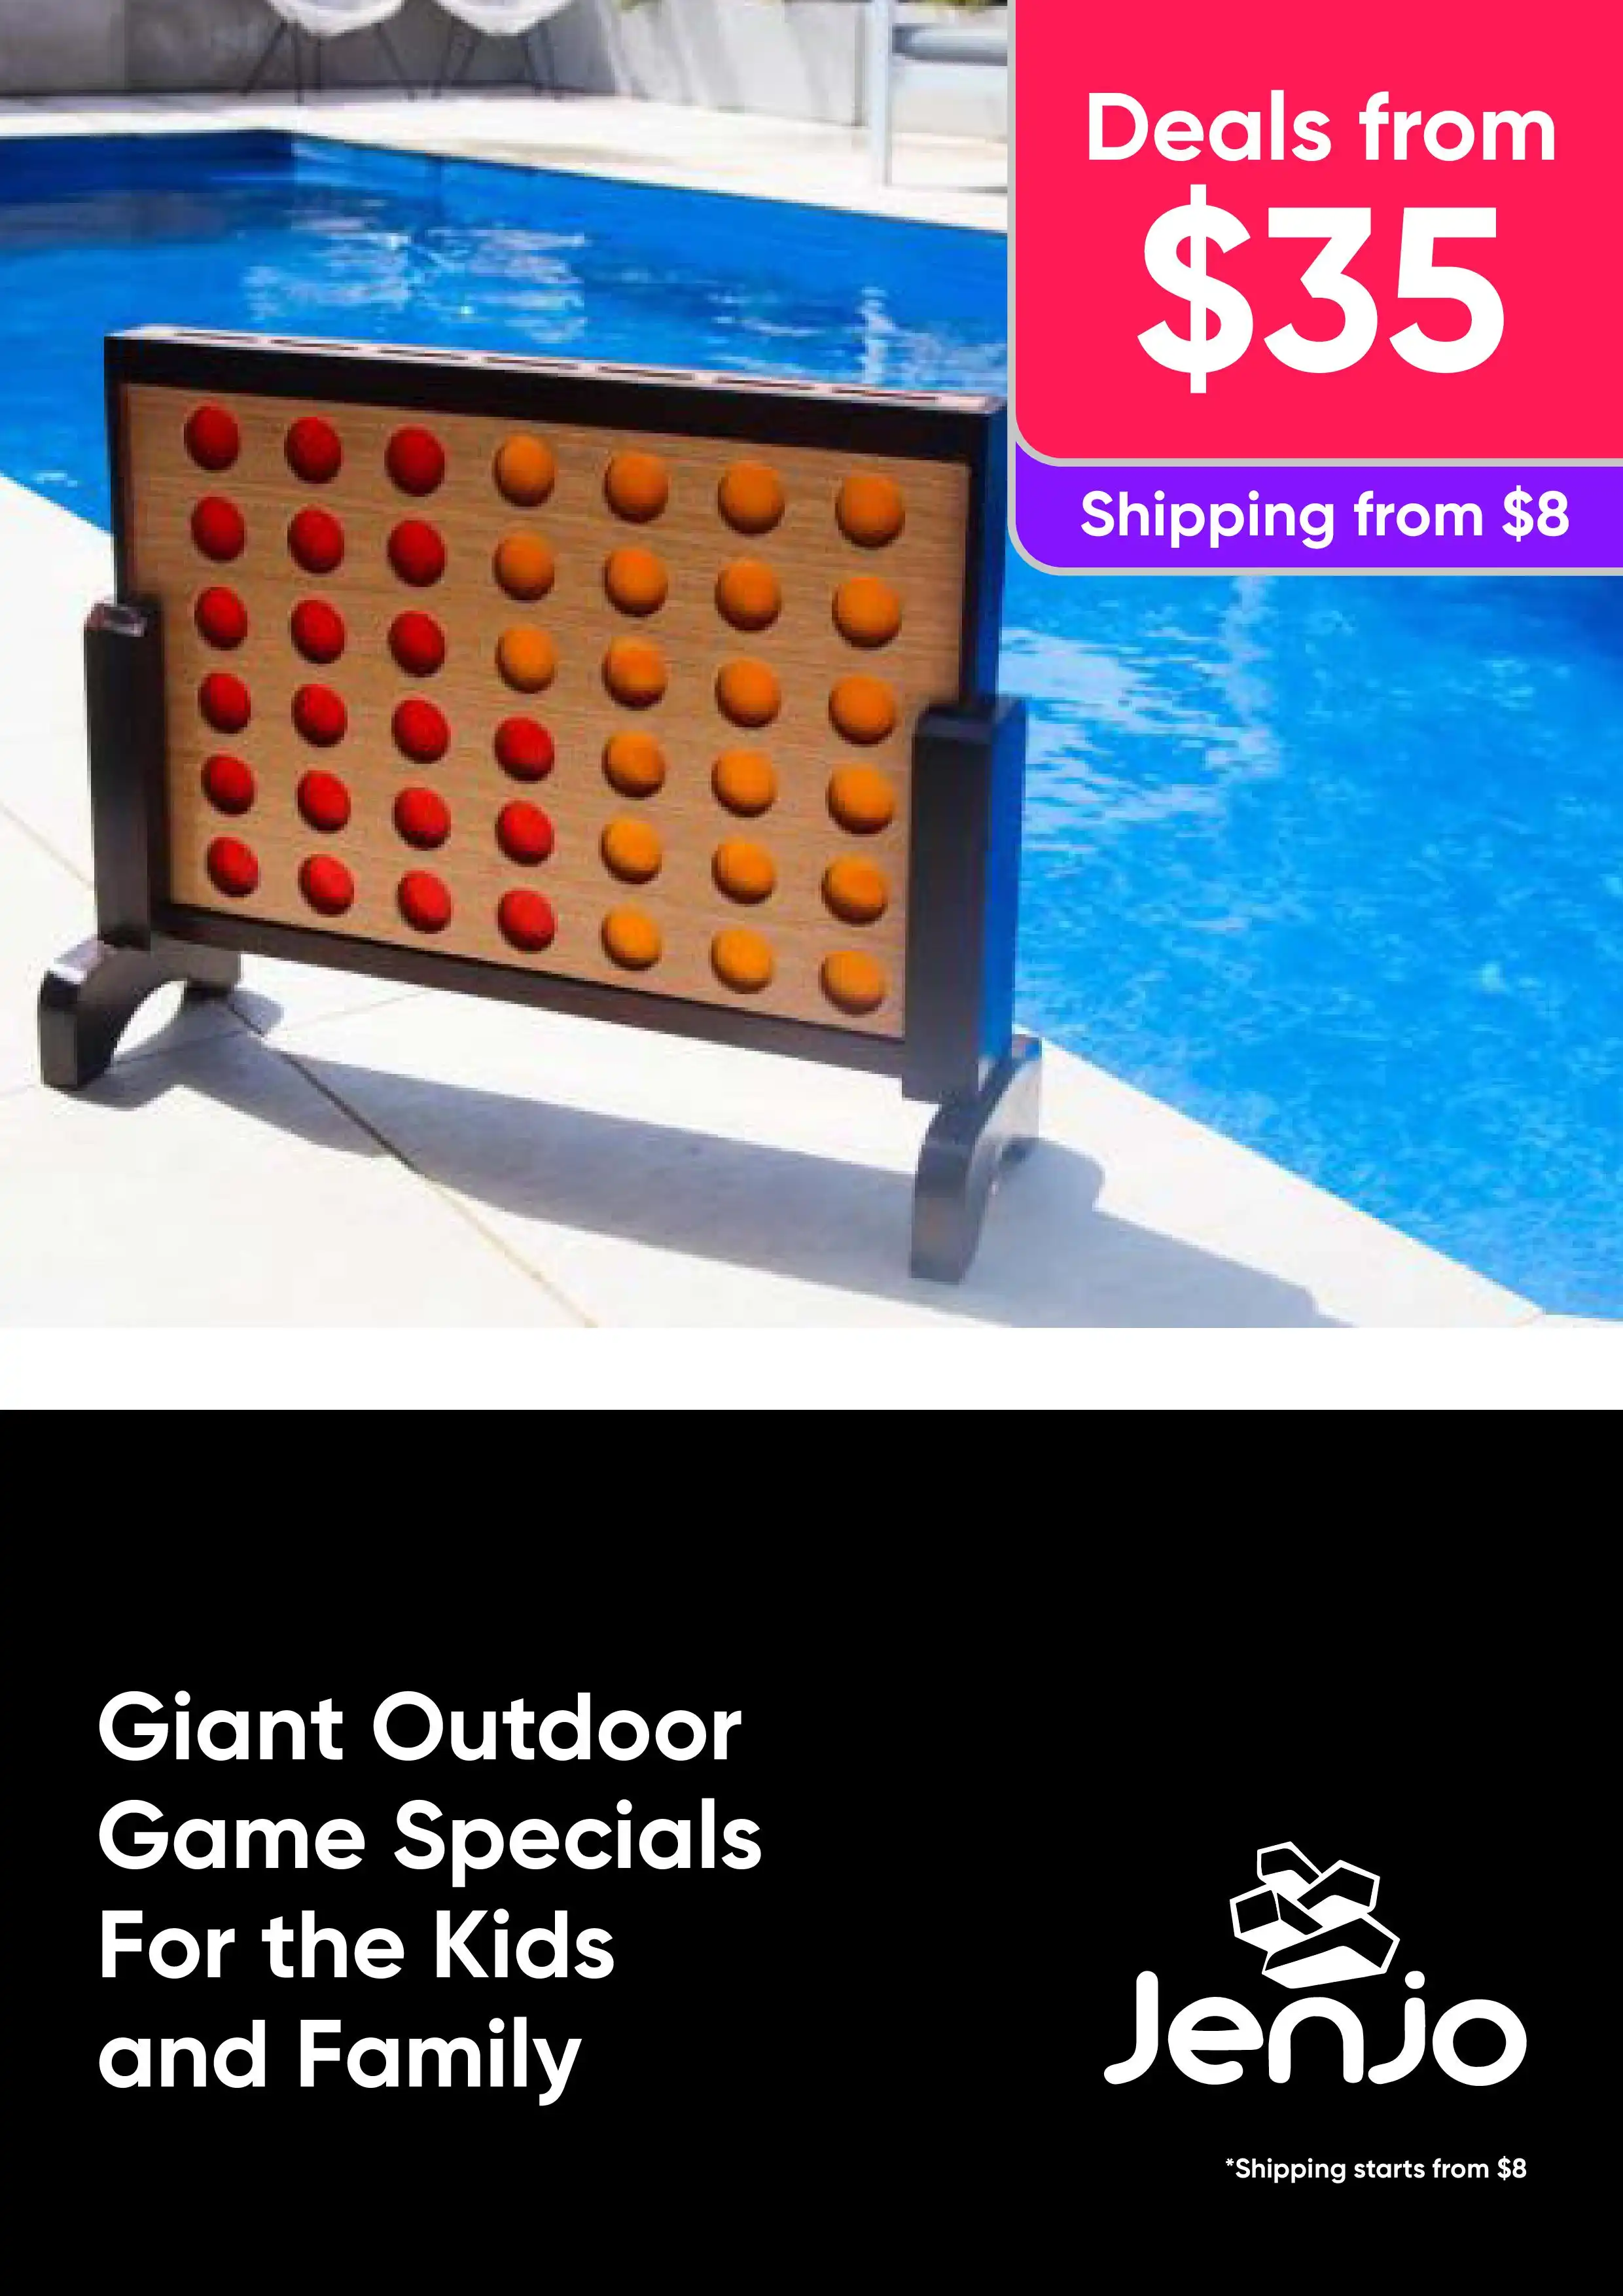 Giant Outdoor Games For the Kids and Family - Shop Specials Now